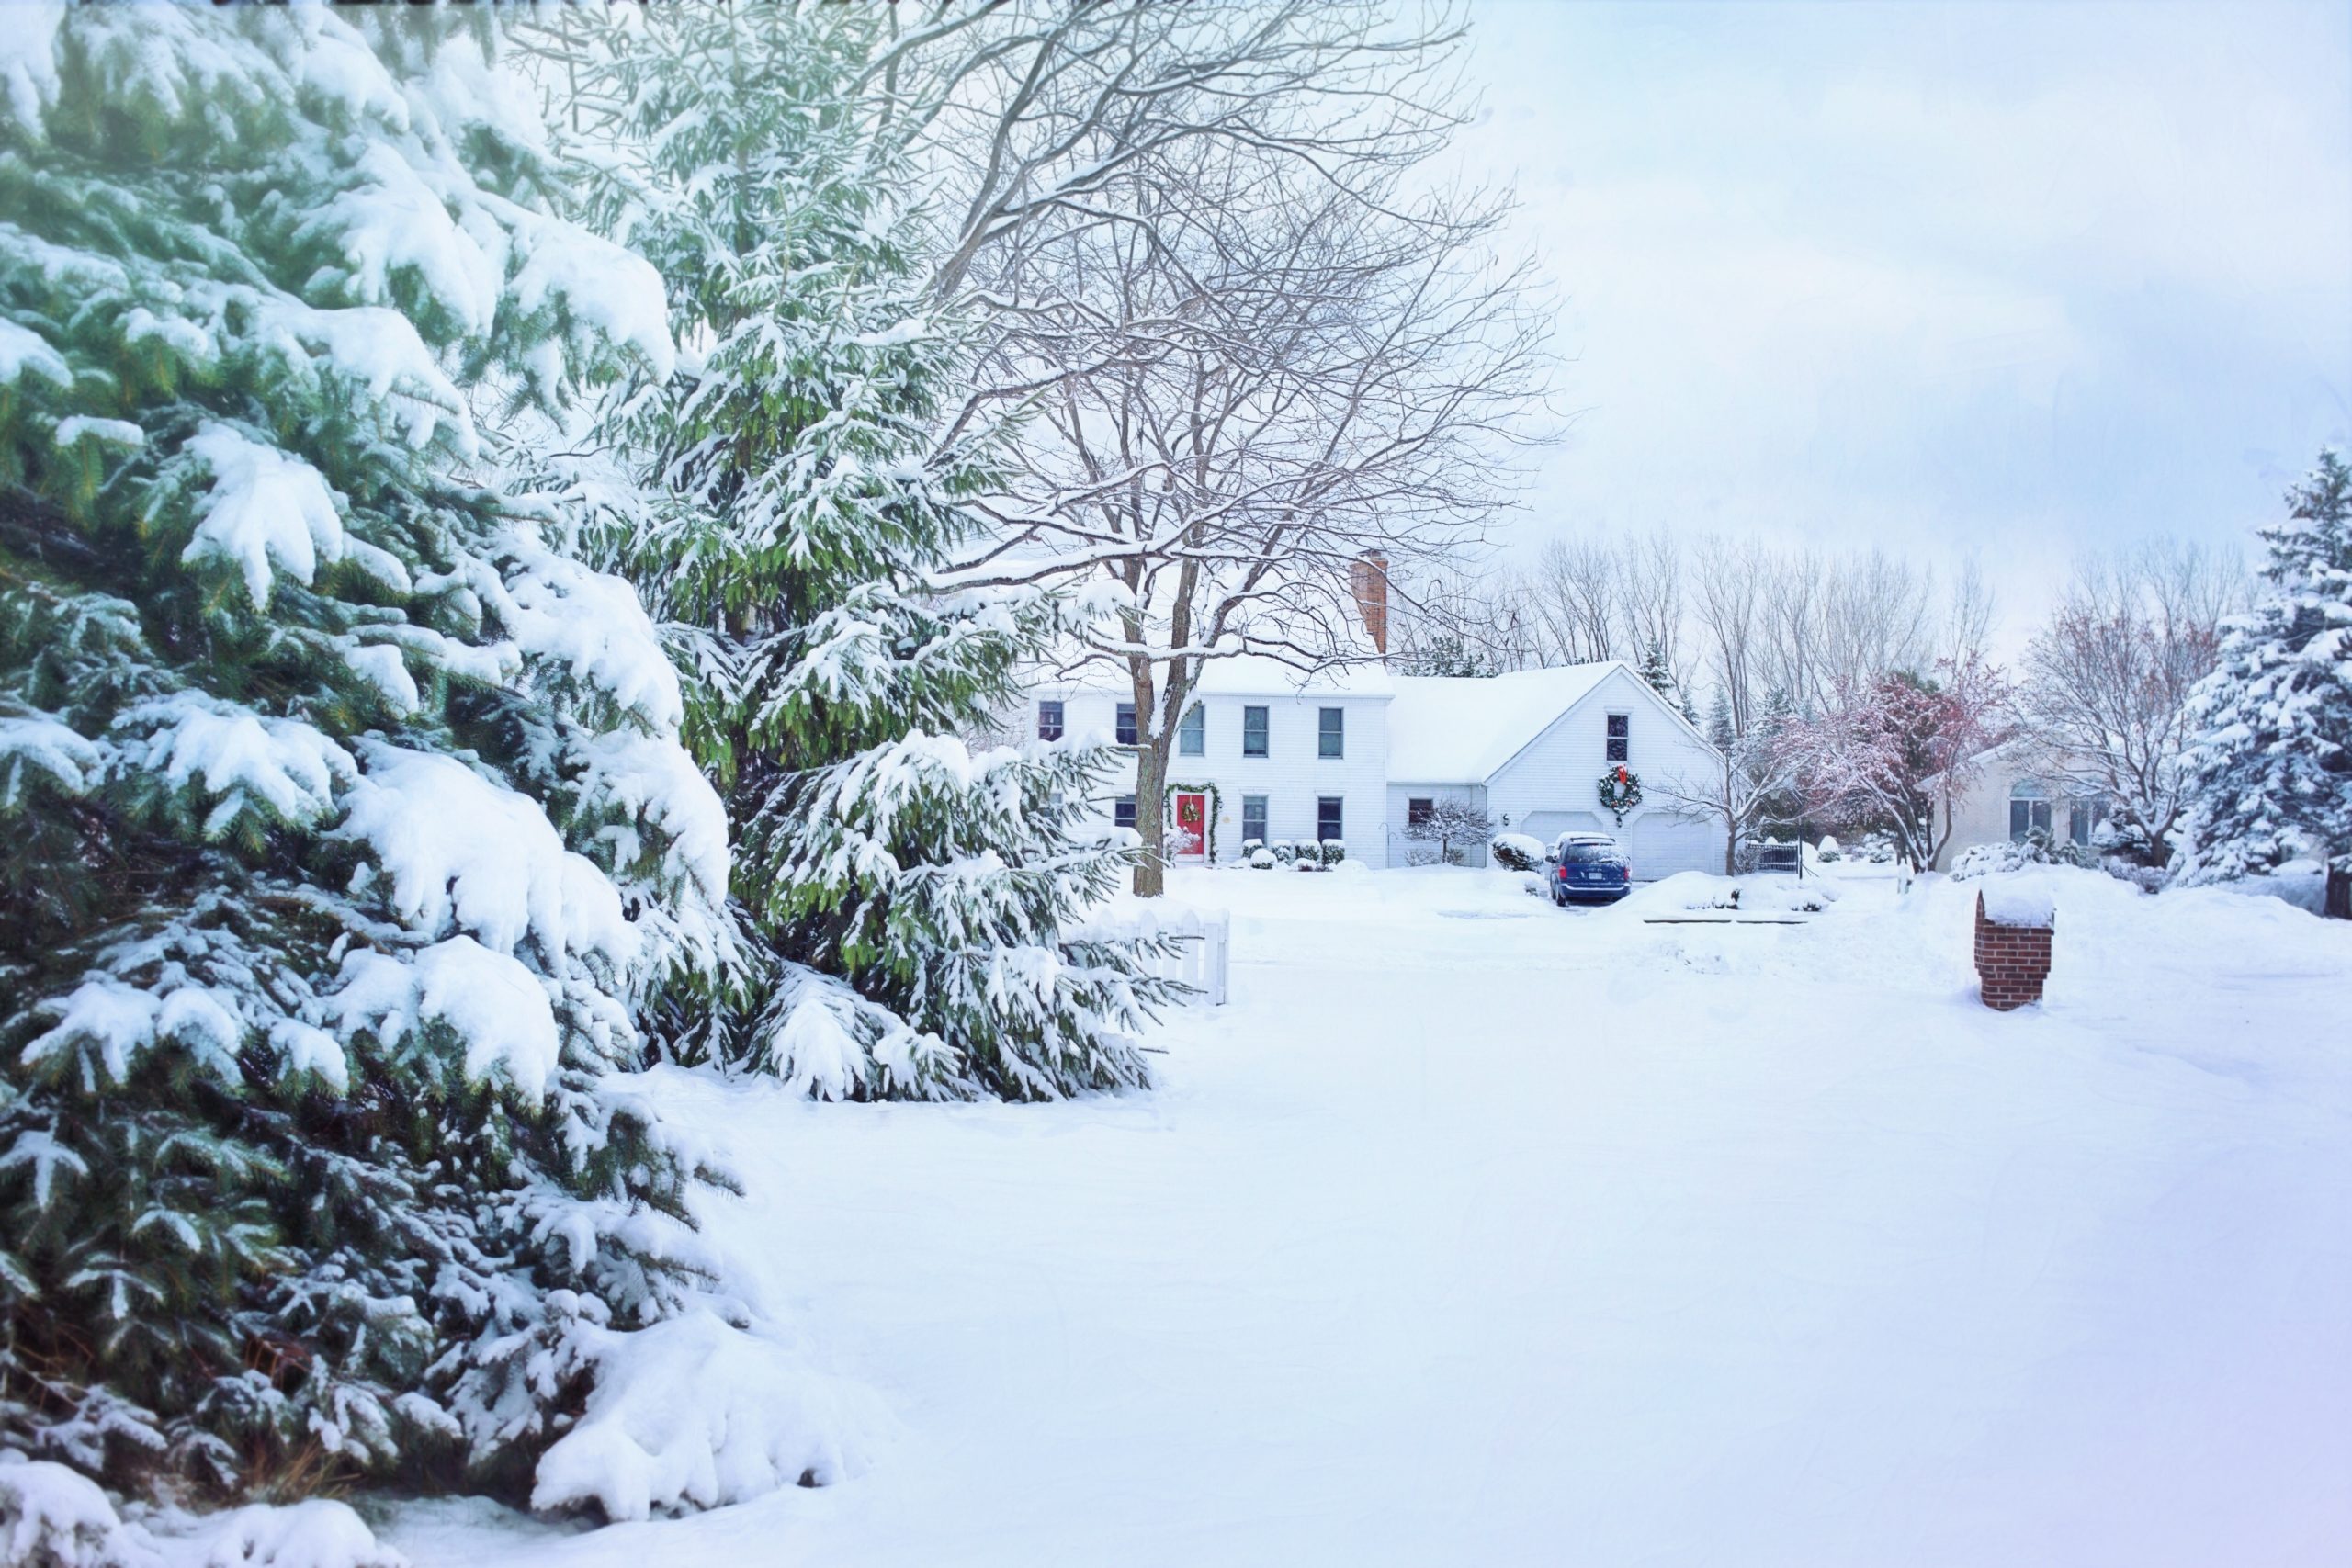 KEEPING YOUR TREES HEALTHY IN THE WINTER